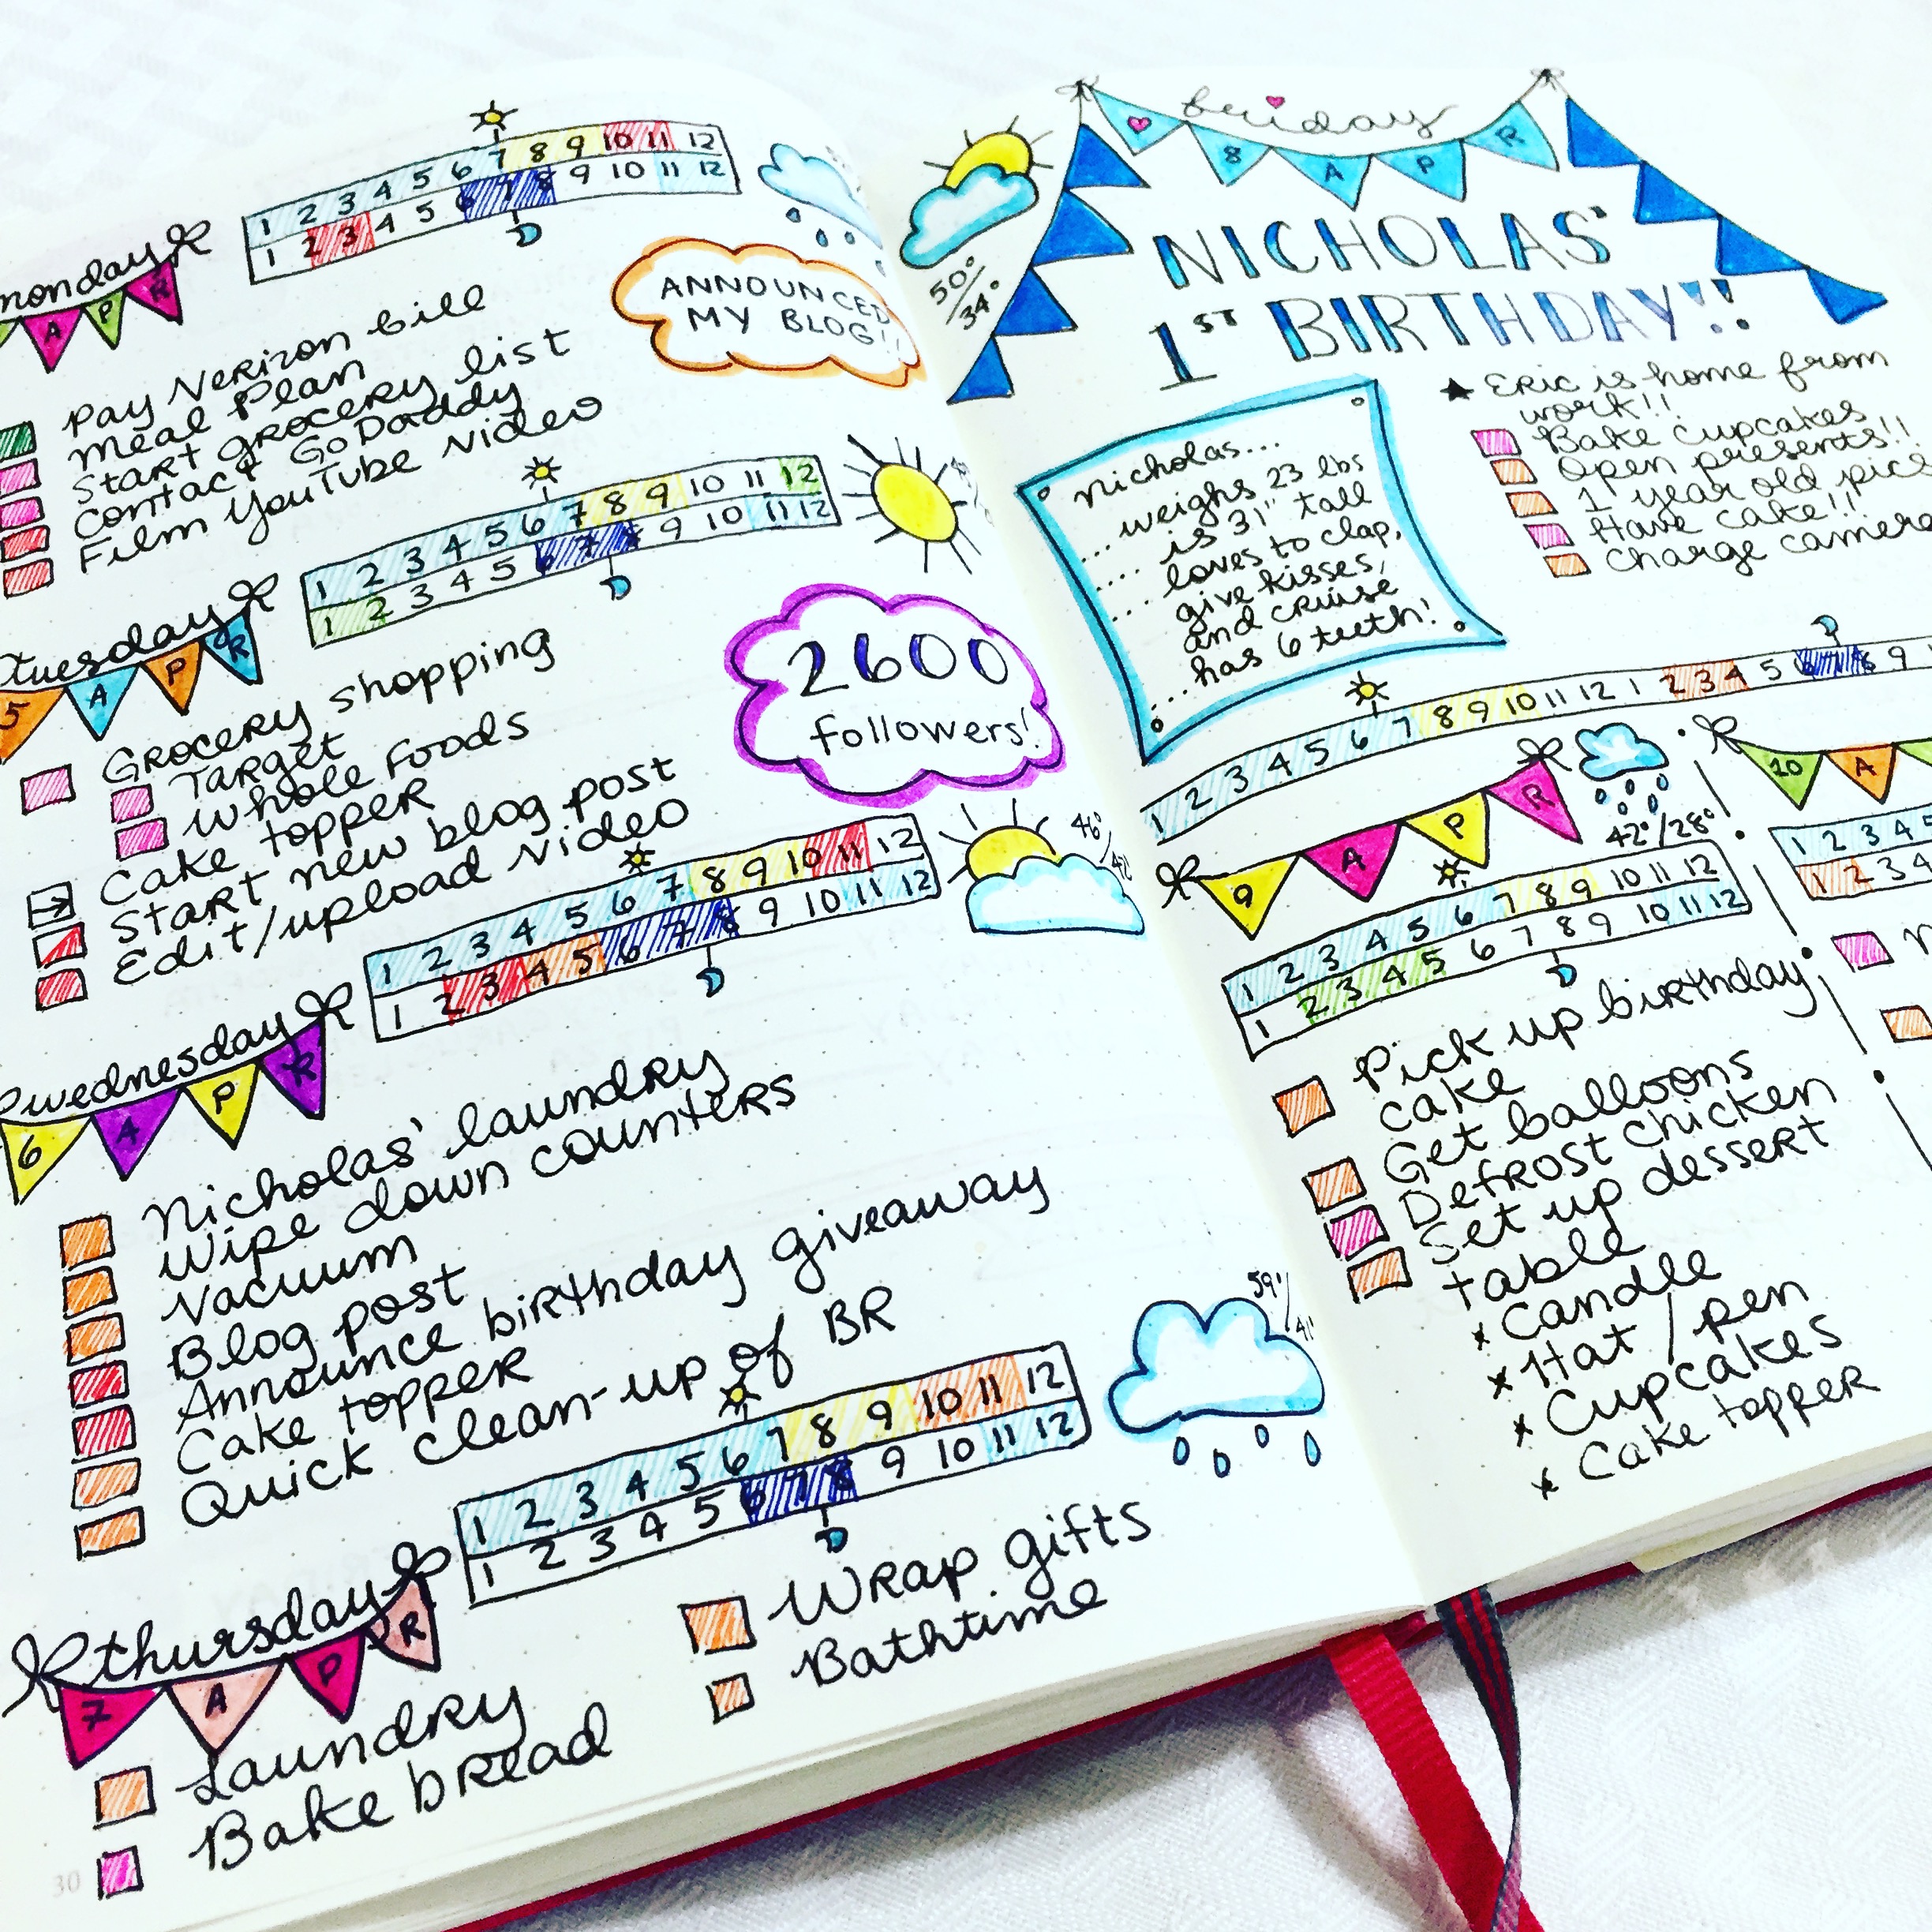 Daily Planning in my Bullet Journal